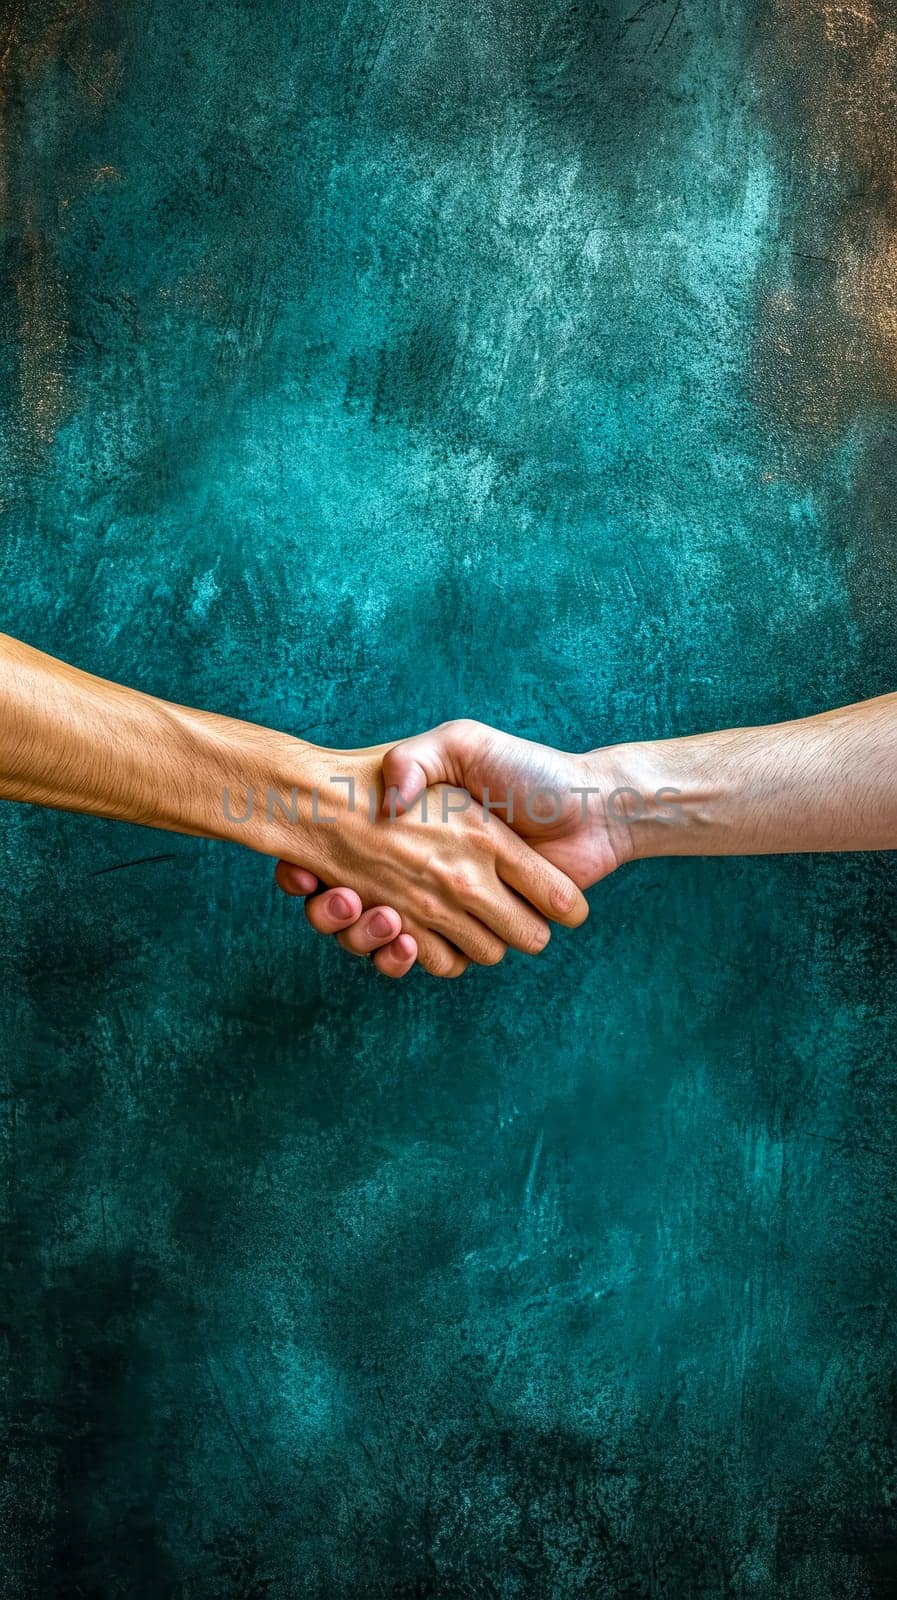 two hands engaged in a firm handshake, set against a textured turquoise and teal background that provides a rustic and artistic feel. vertical